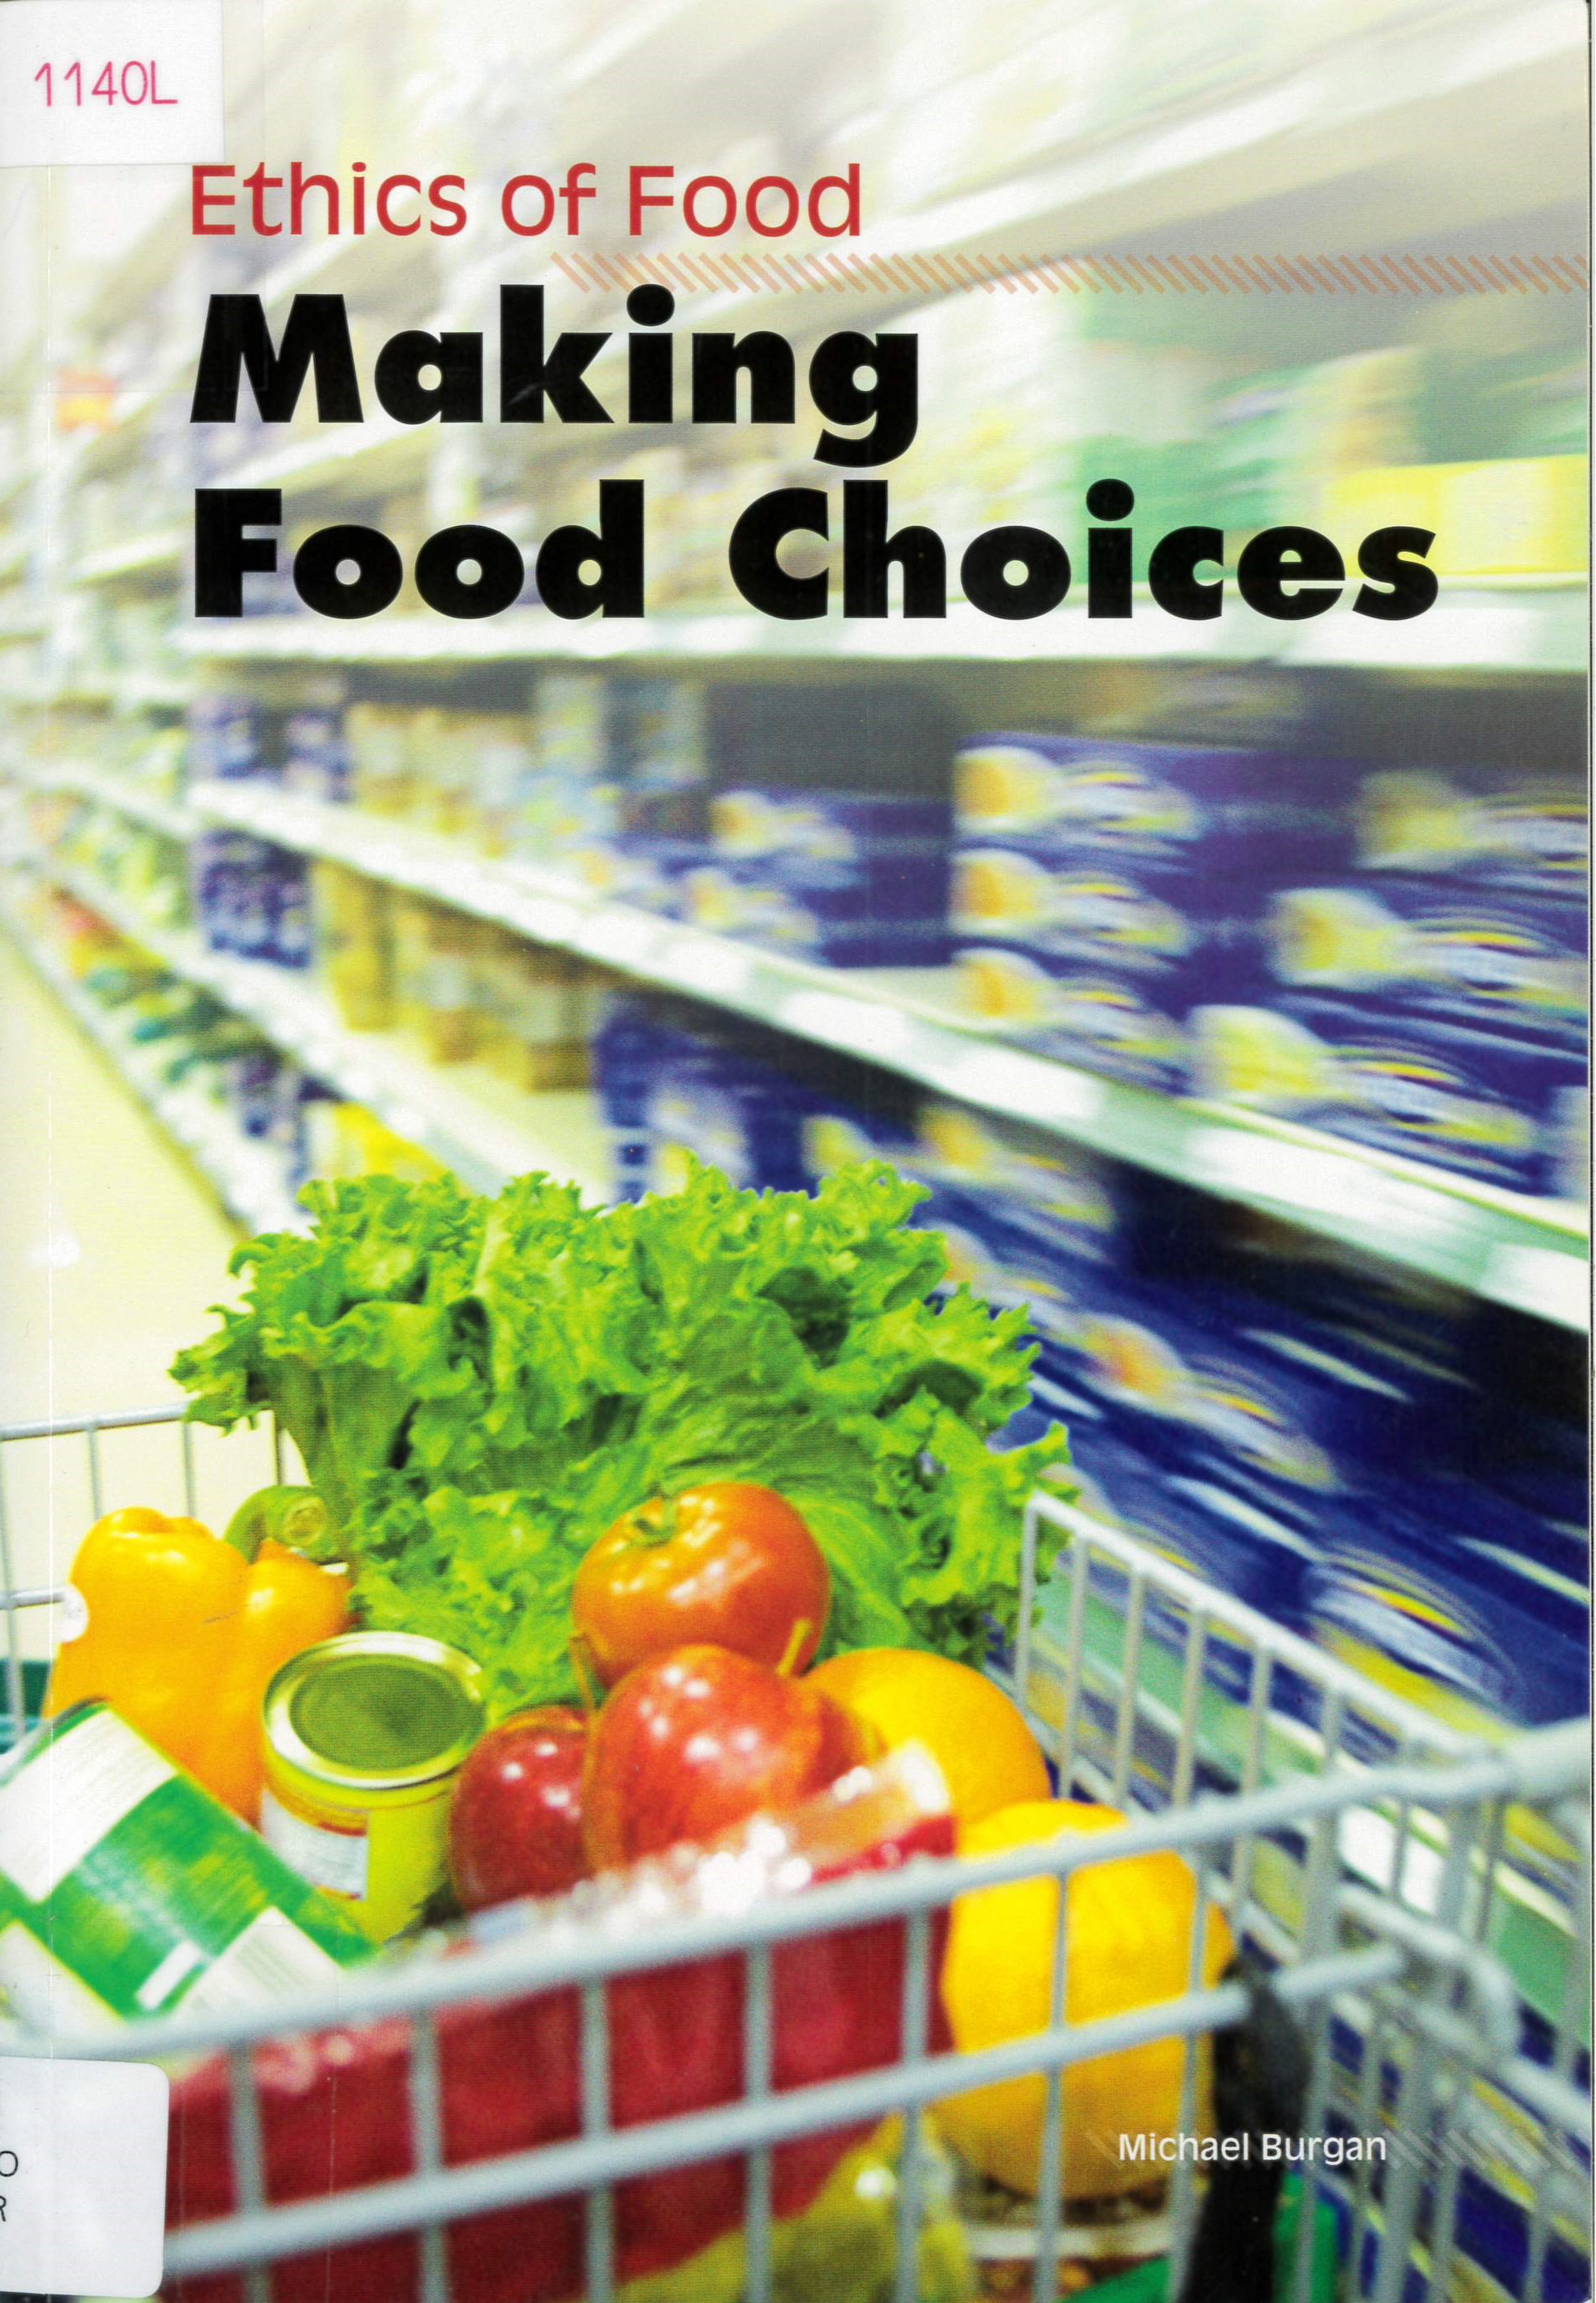 Ethics of food. Making choices